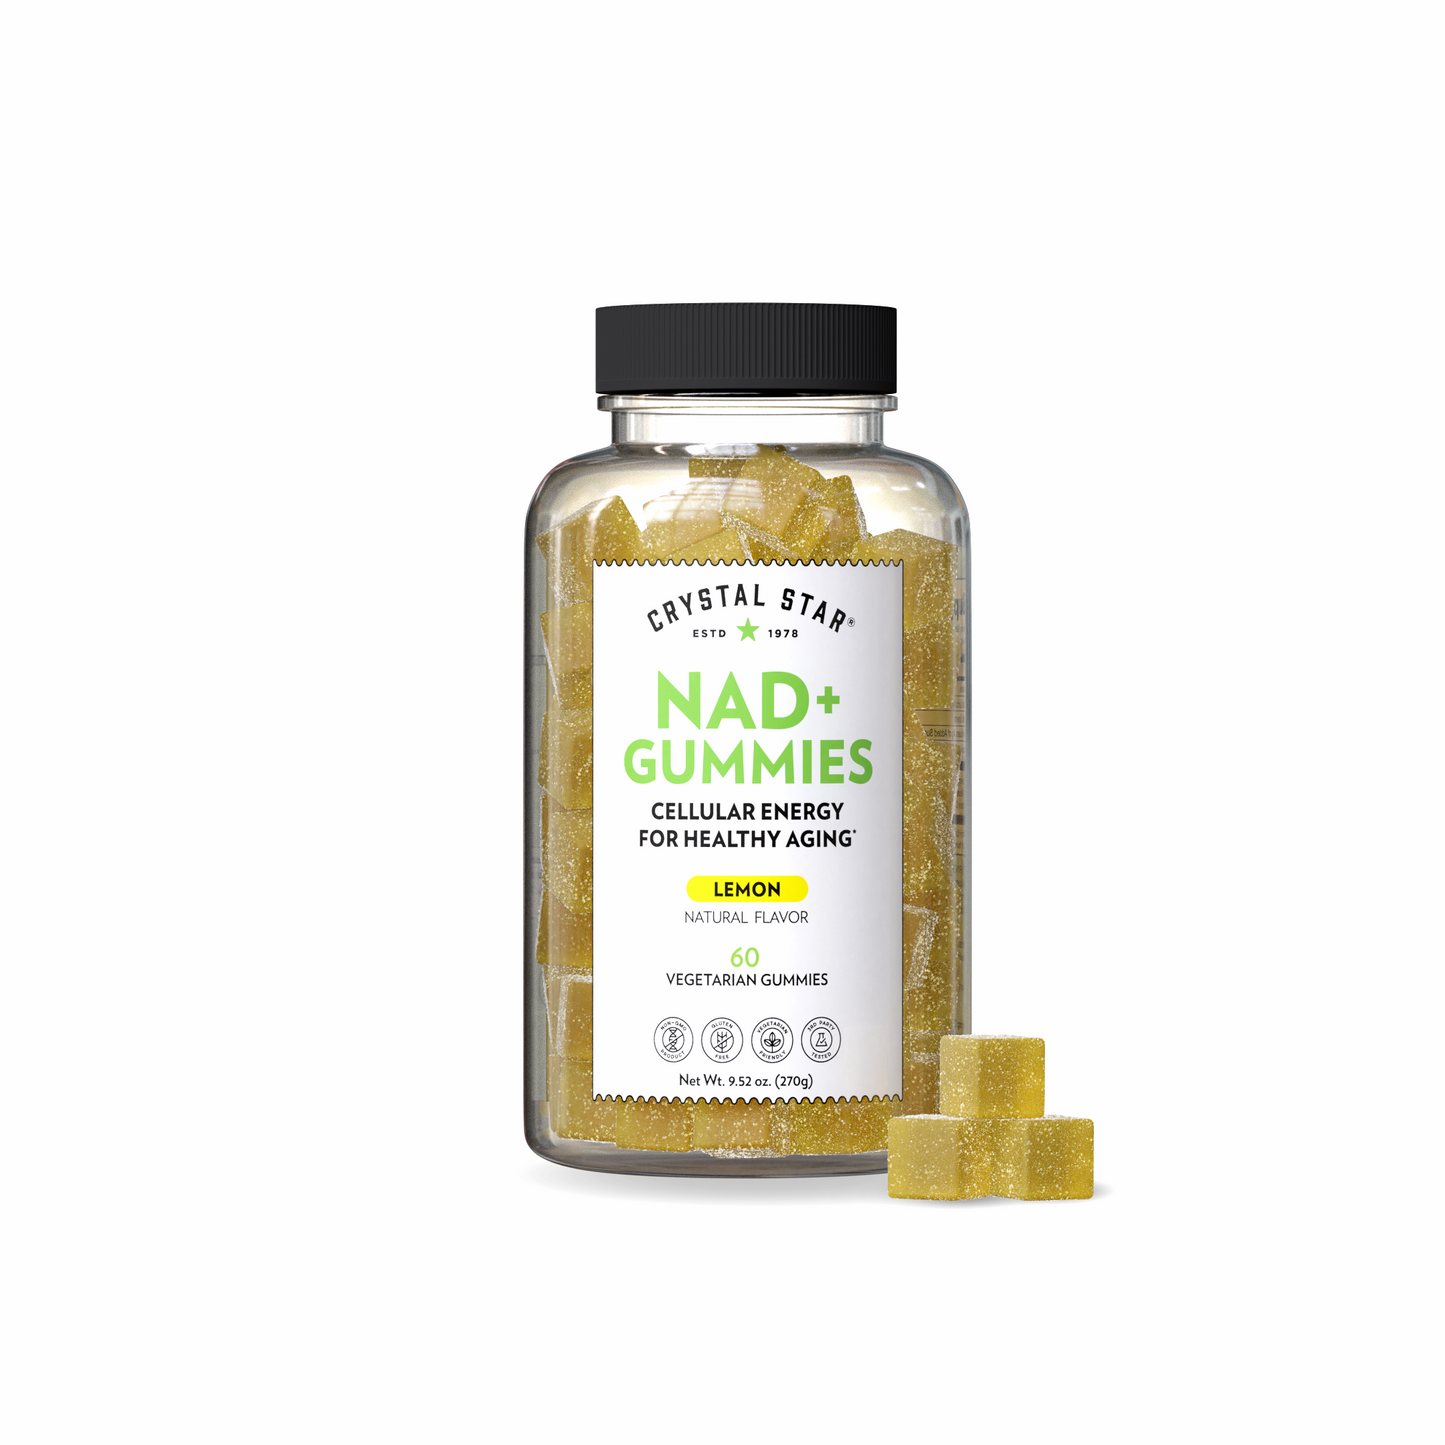 Crystal Star NAD+ Gummies for cellular energy and aging, Detail